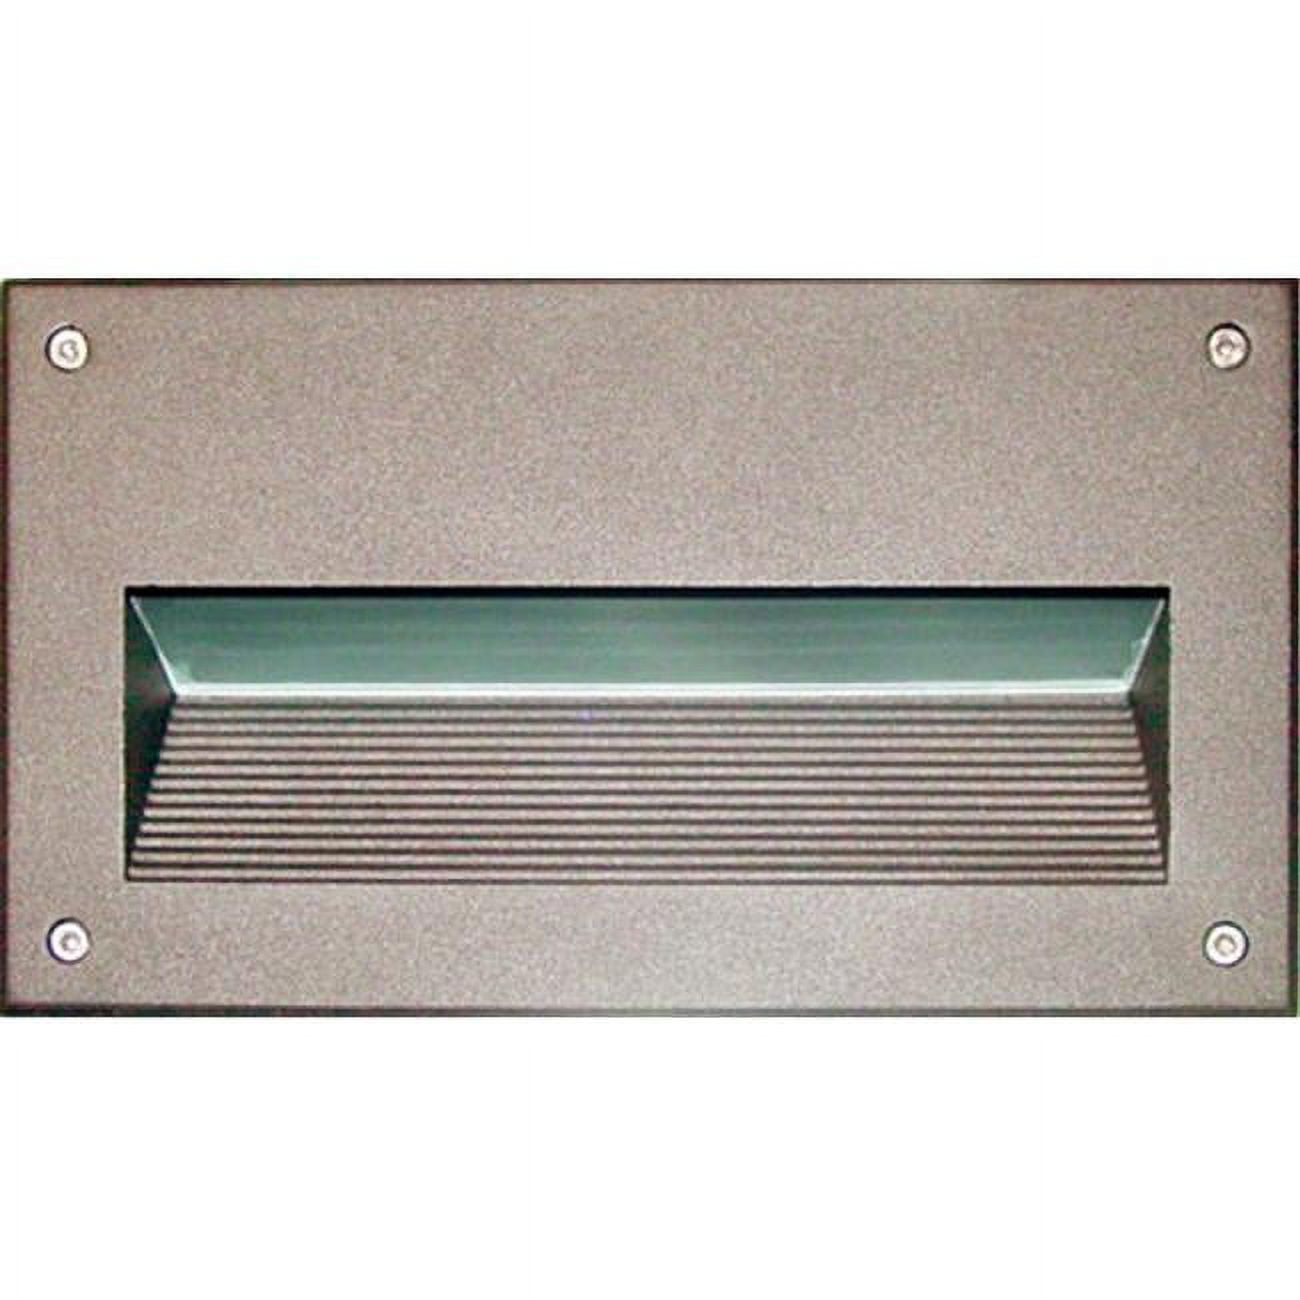 Picture of Dabmar Lighting DSL1003-BZ Recessed Brick, Step & Wall Light, Bronze - 4.95 x 8.80 x 2.90 in.